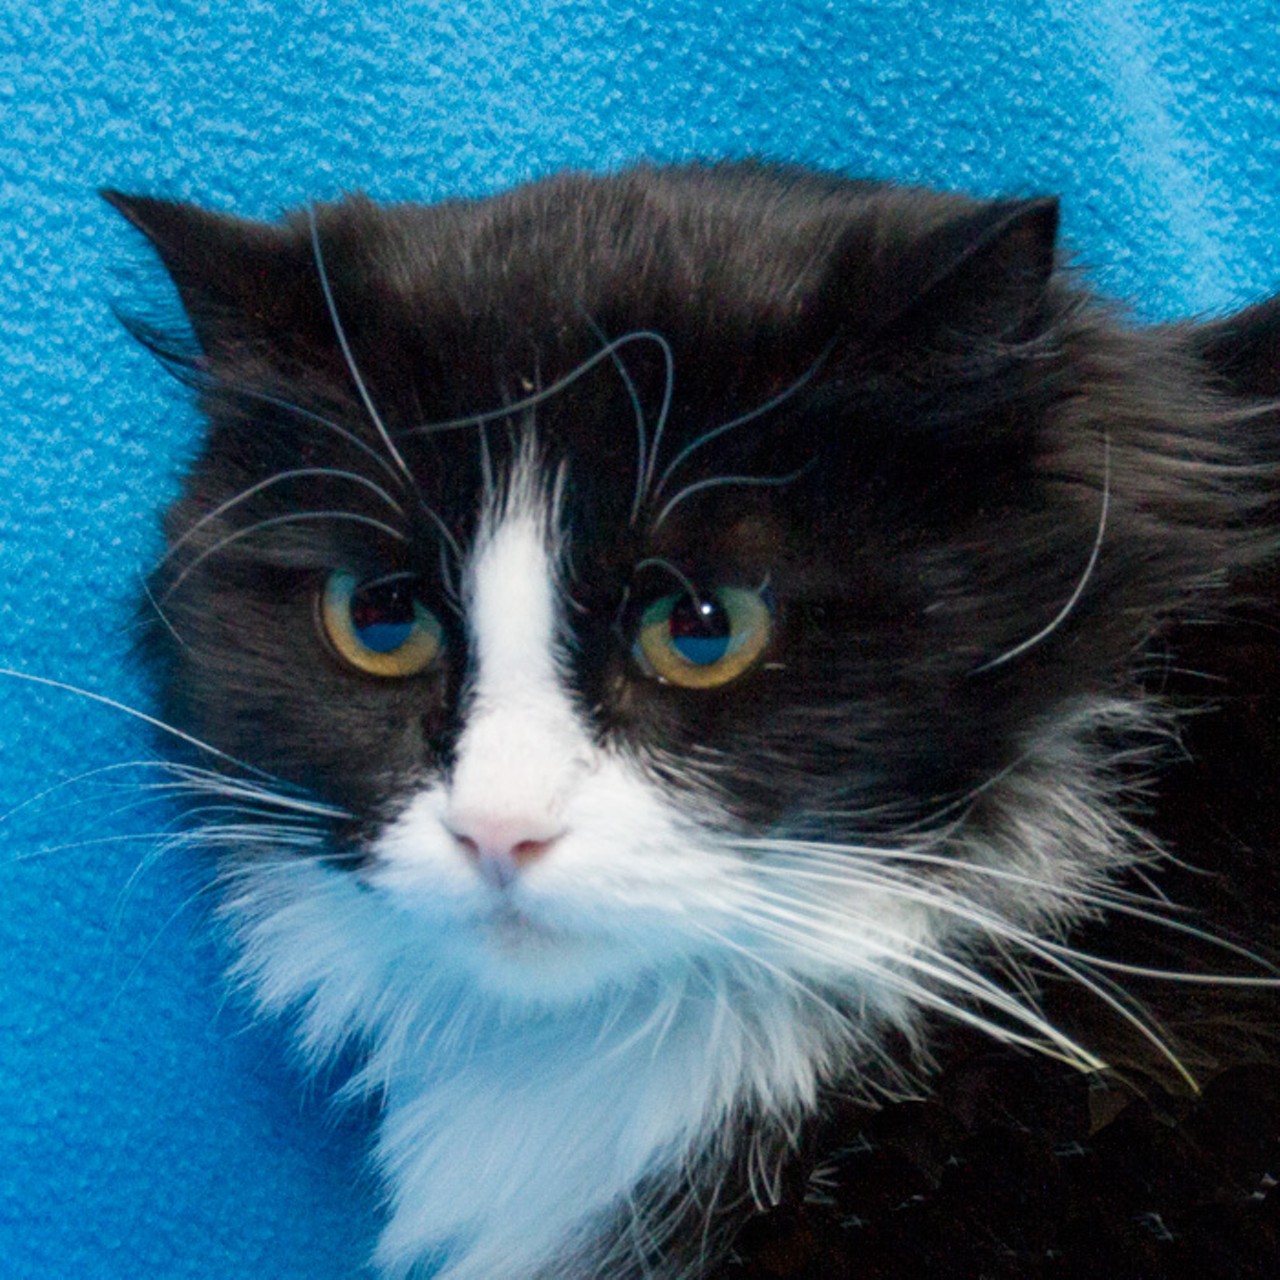 NAME: Esmeralda
GENDER: Female
BREED: Domestic Medium Hair
AGE: 4 years, 1 month
WEIGHT: 9 pounds
SPECIAL CONSIDERATIONS: None
REASON I CAME TO MHS: Homeless in Redford
LOCATION: Petco of Sterling Heights
ID NUMBER: 862651